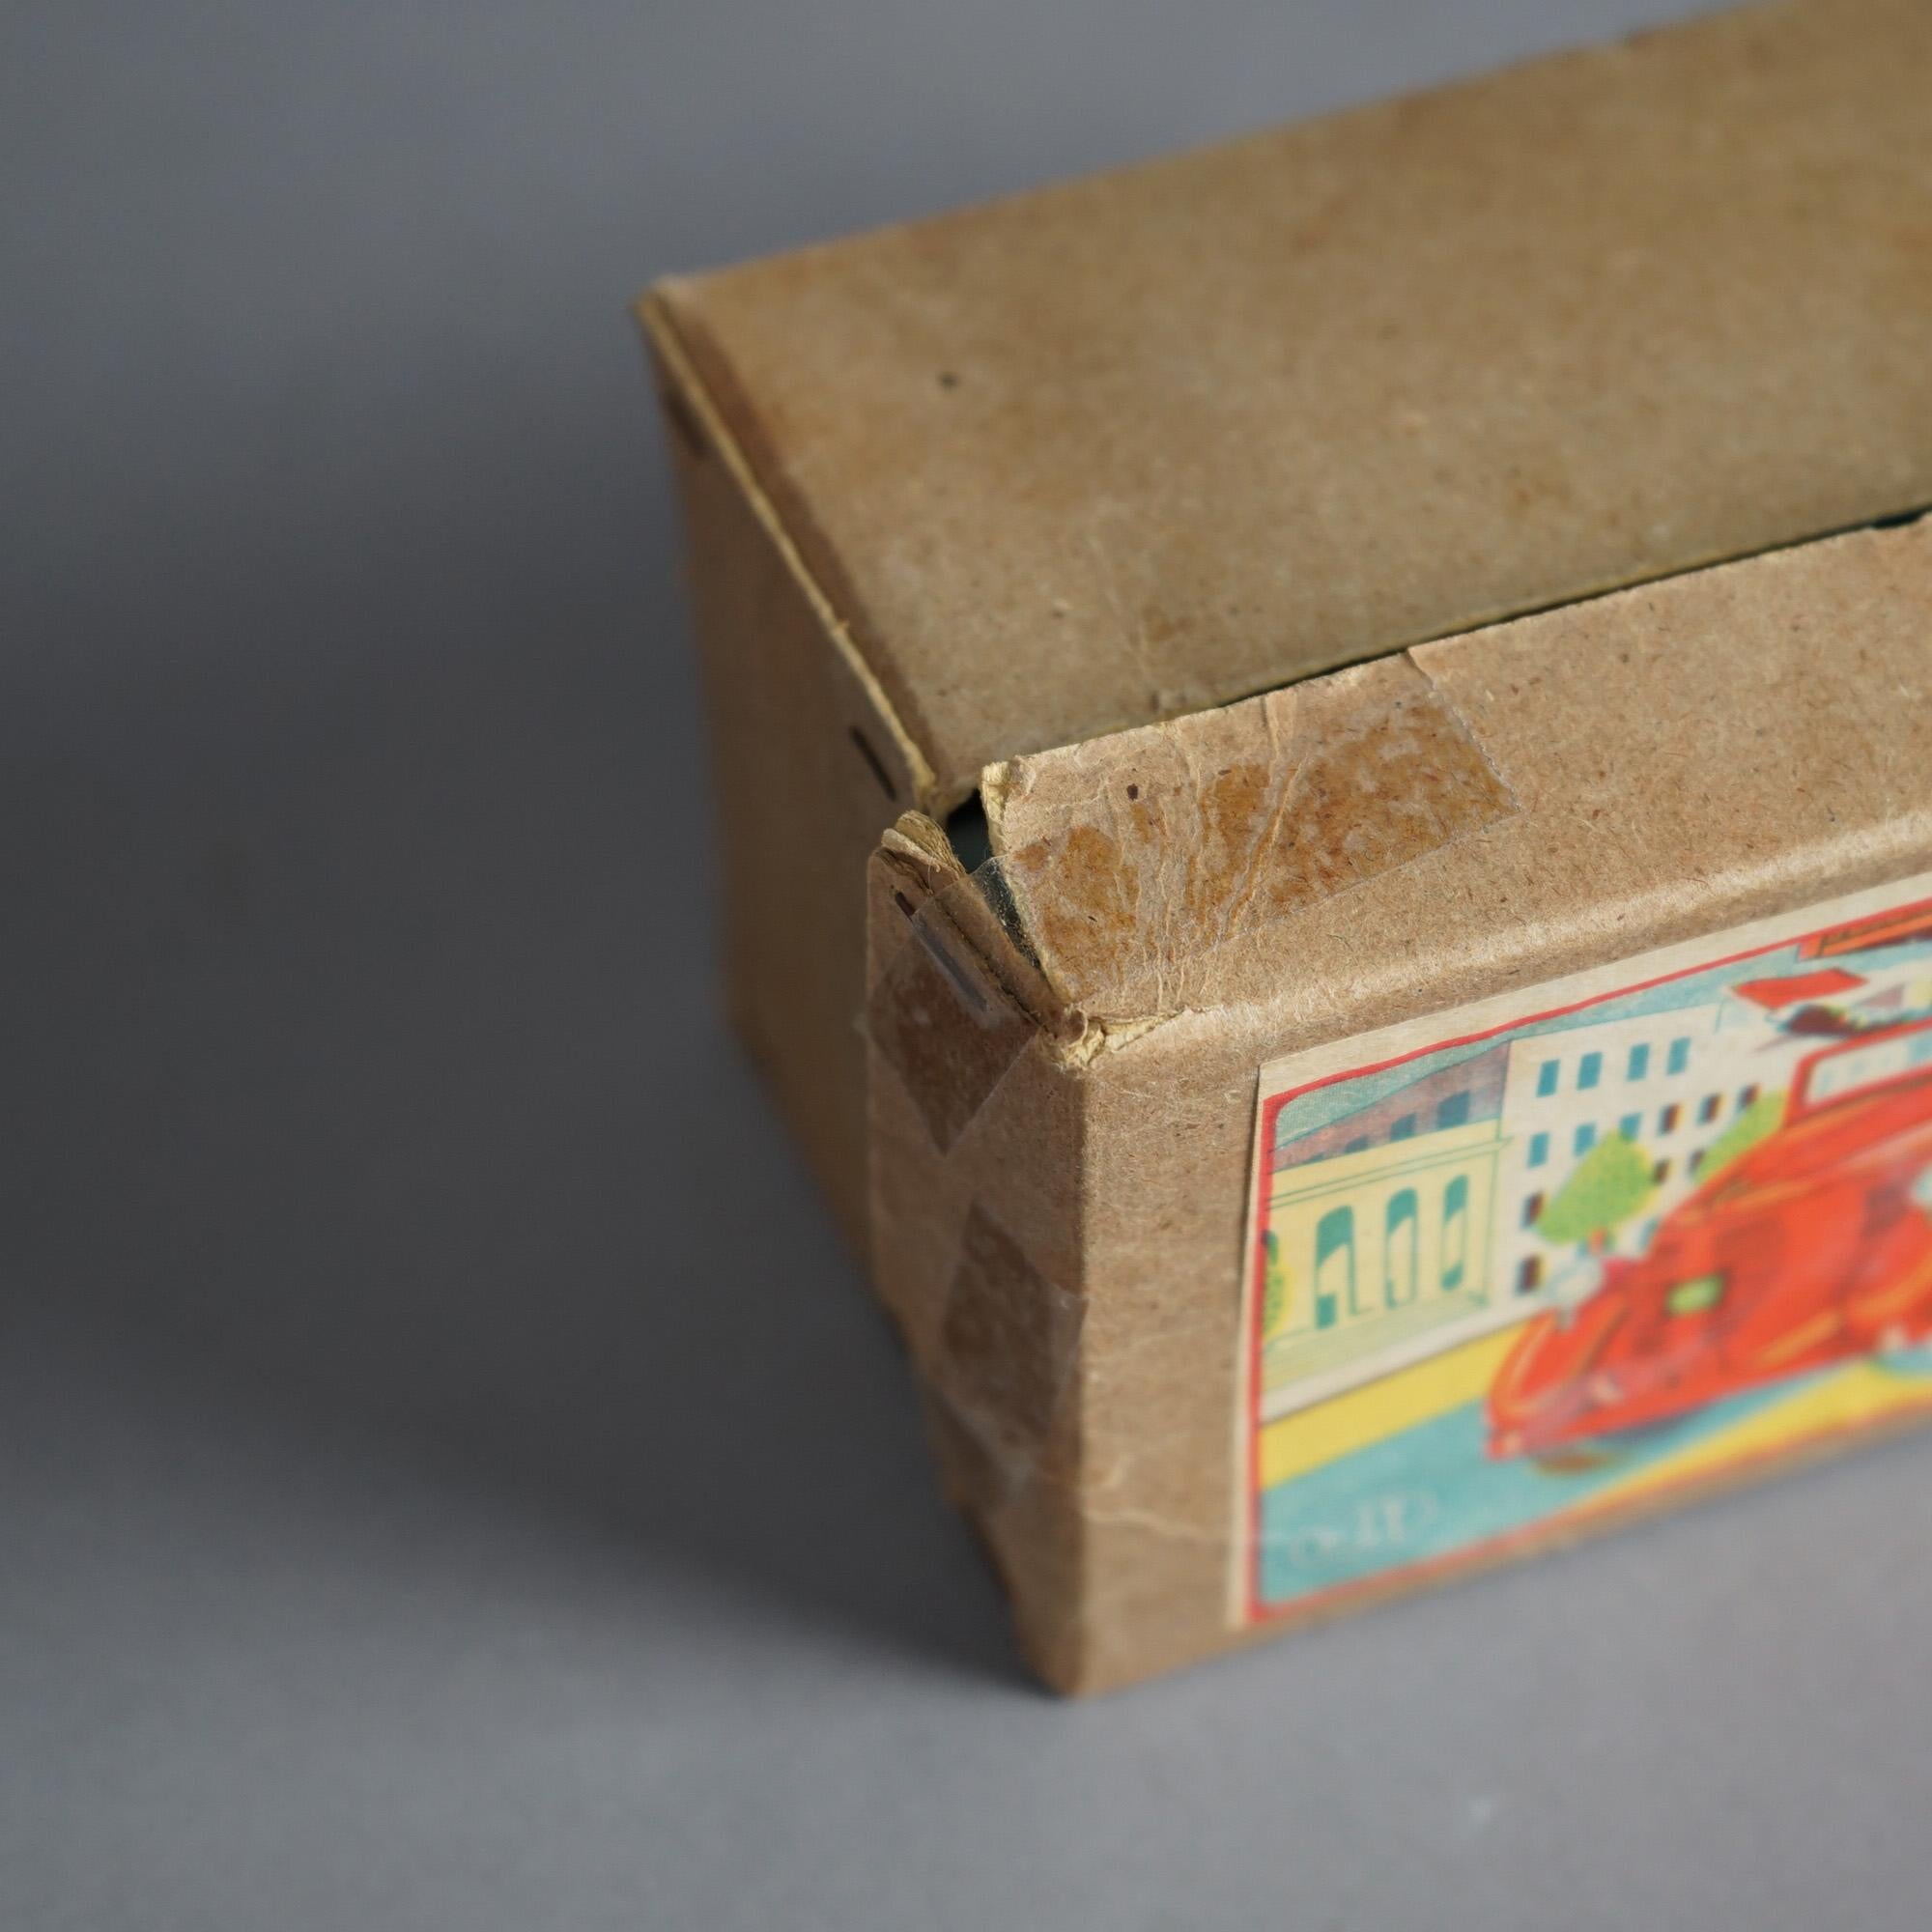 Japanese Tin Litho Toy Fire Engine In The Original Box Circa 1950 6